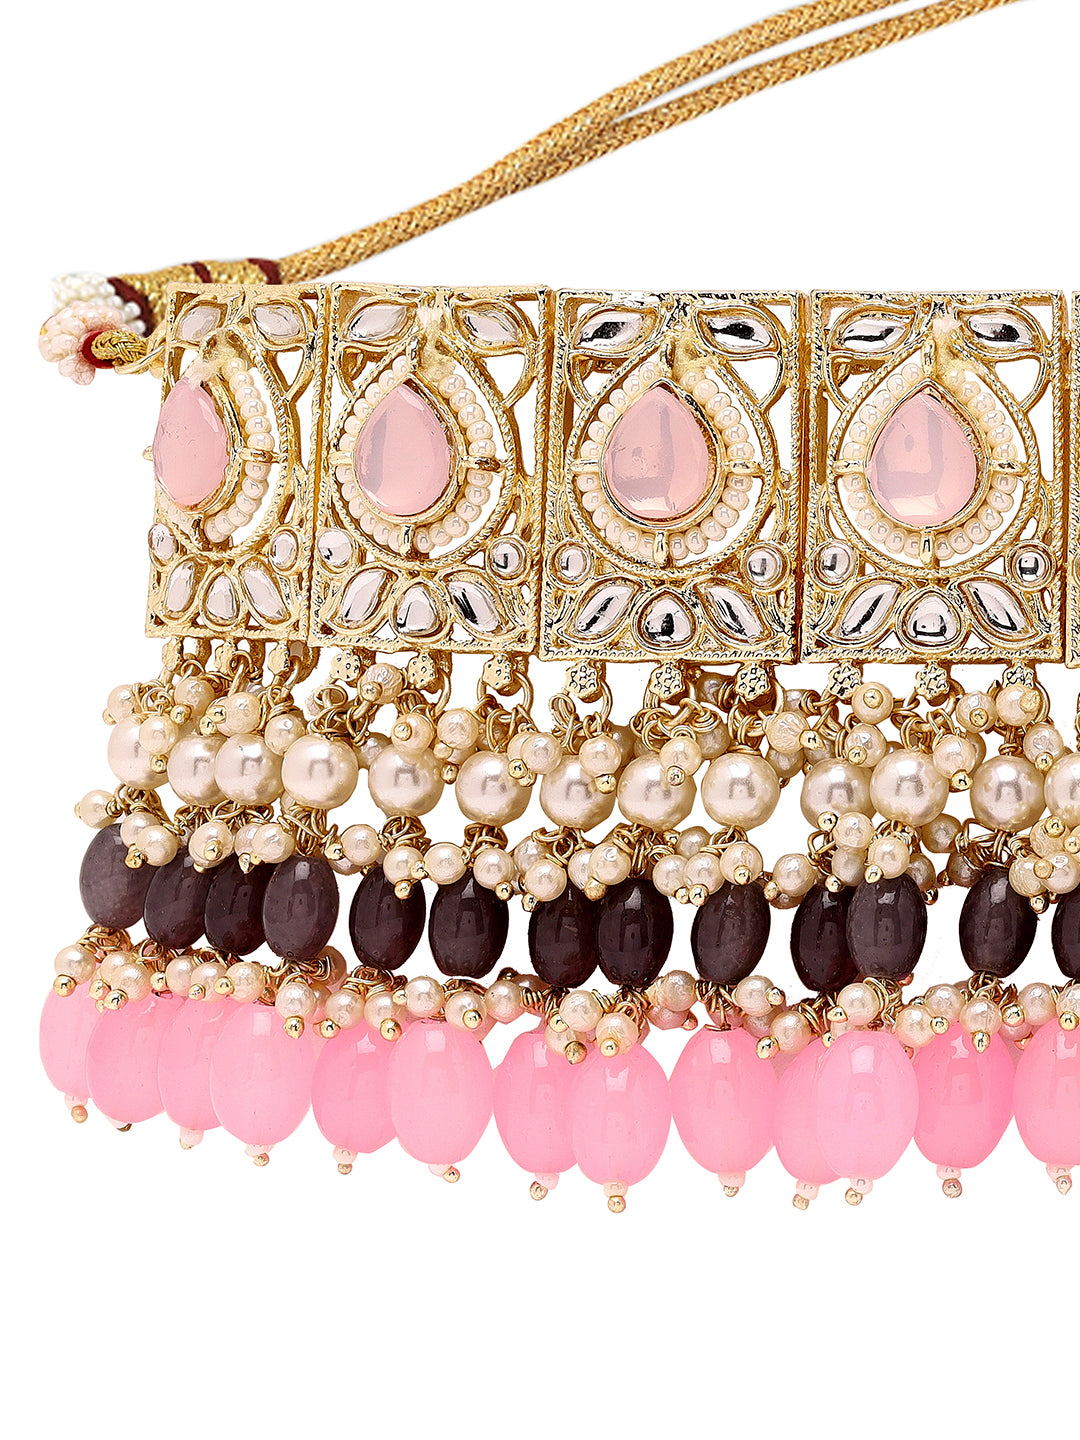 Priyaasi Exquisite Glamour Kundan Choker Set with Chandbali Earrings Adorned with Pink and Grey Stones